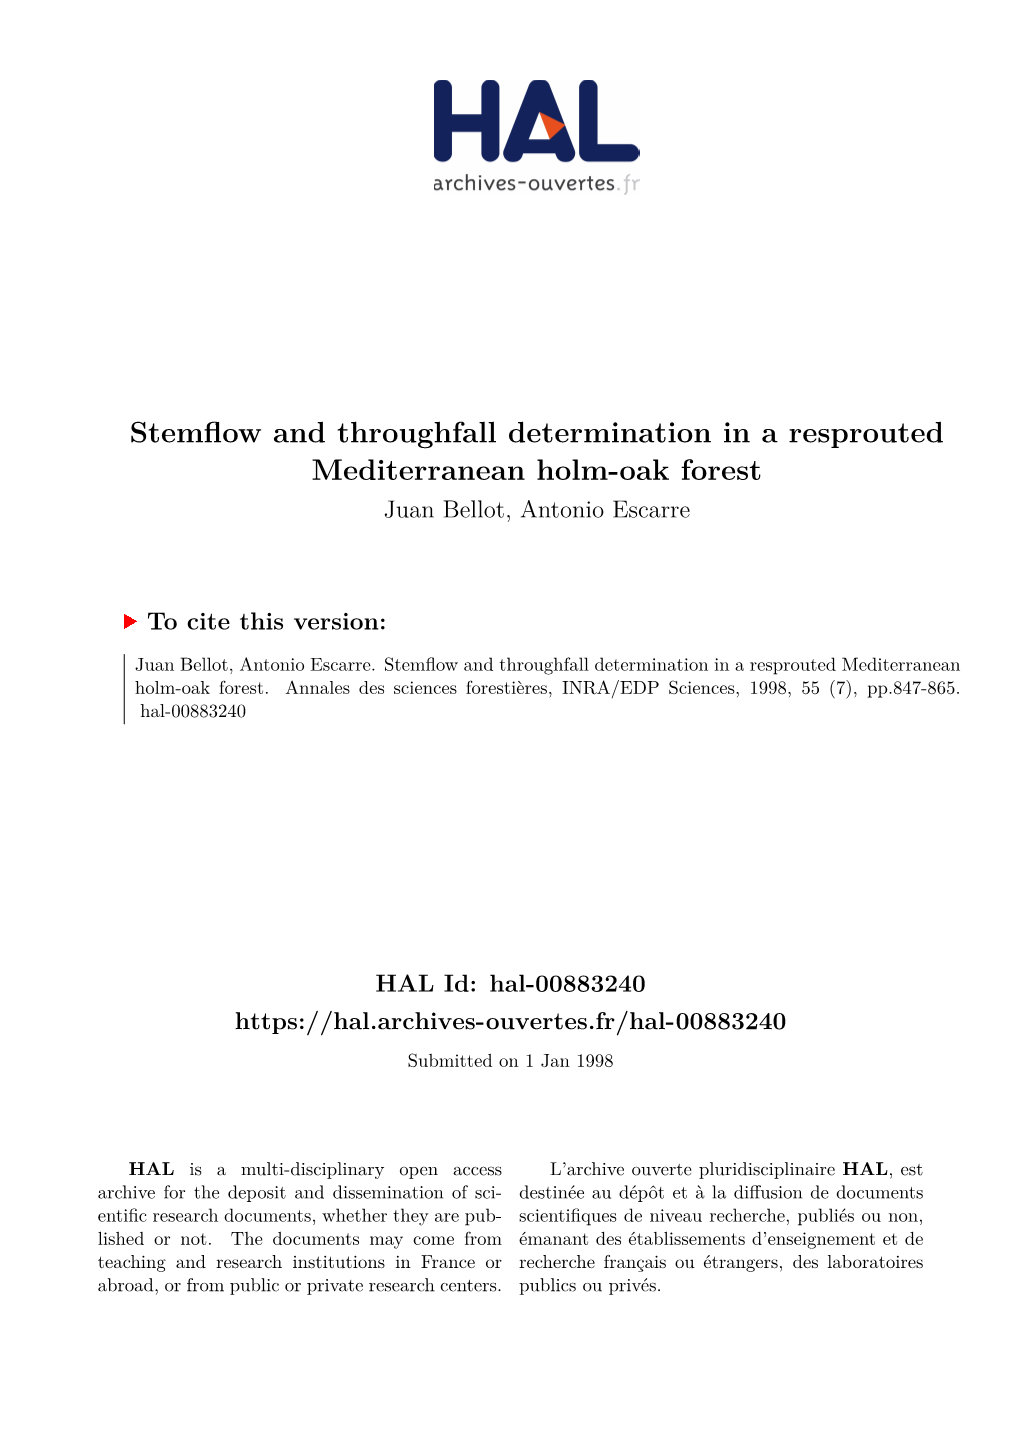 Stemflow and Throughfall Determination in a Resprouted Mediterranean Holm-Oak Forest Juan Bellot, Antonio Escarre